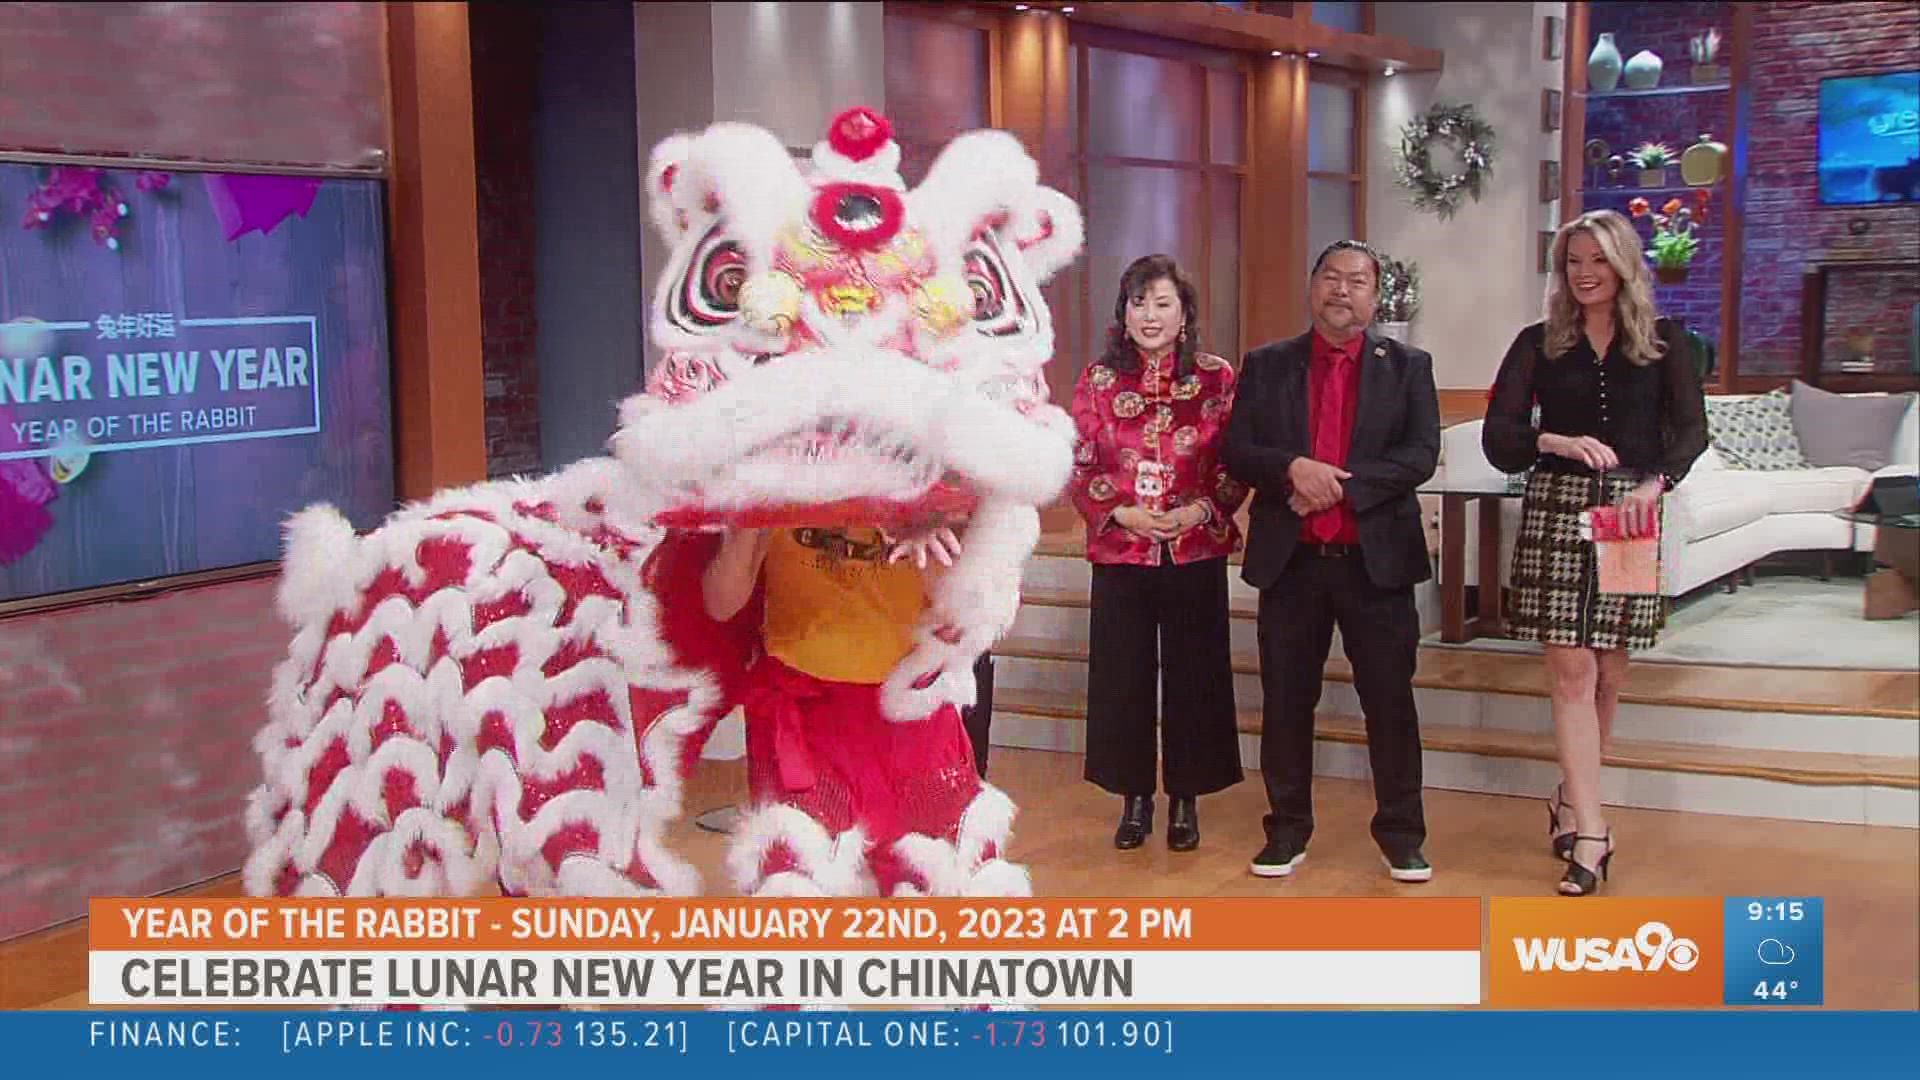 Parade Chief Commander Rita Lee & MOAPIA Director Ben de Guzman share details on the Chinatown Lunar New Year Parade in DC, happening January 22nd at 2pm.